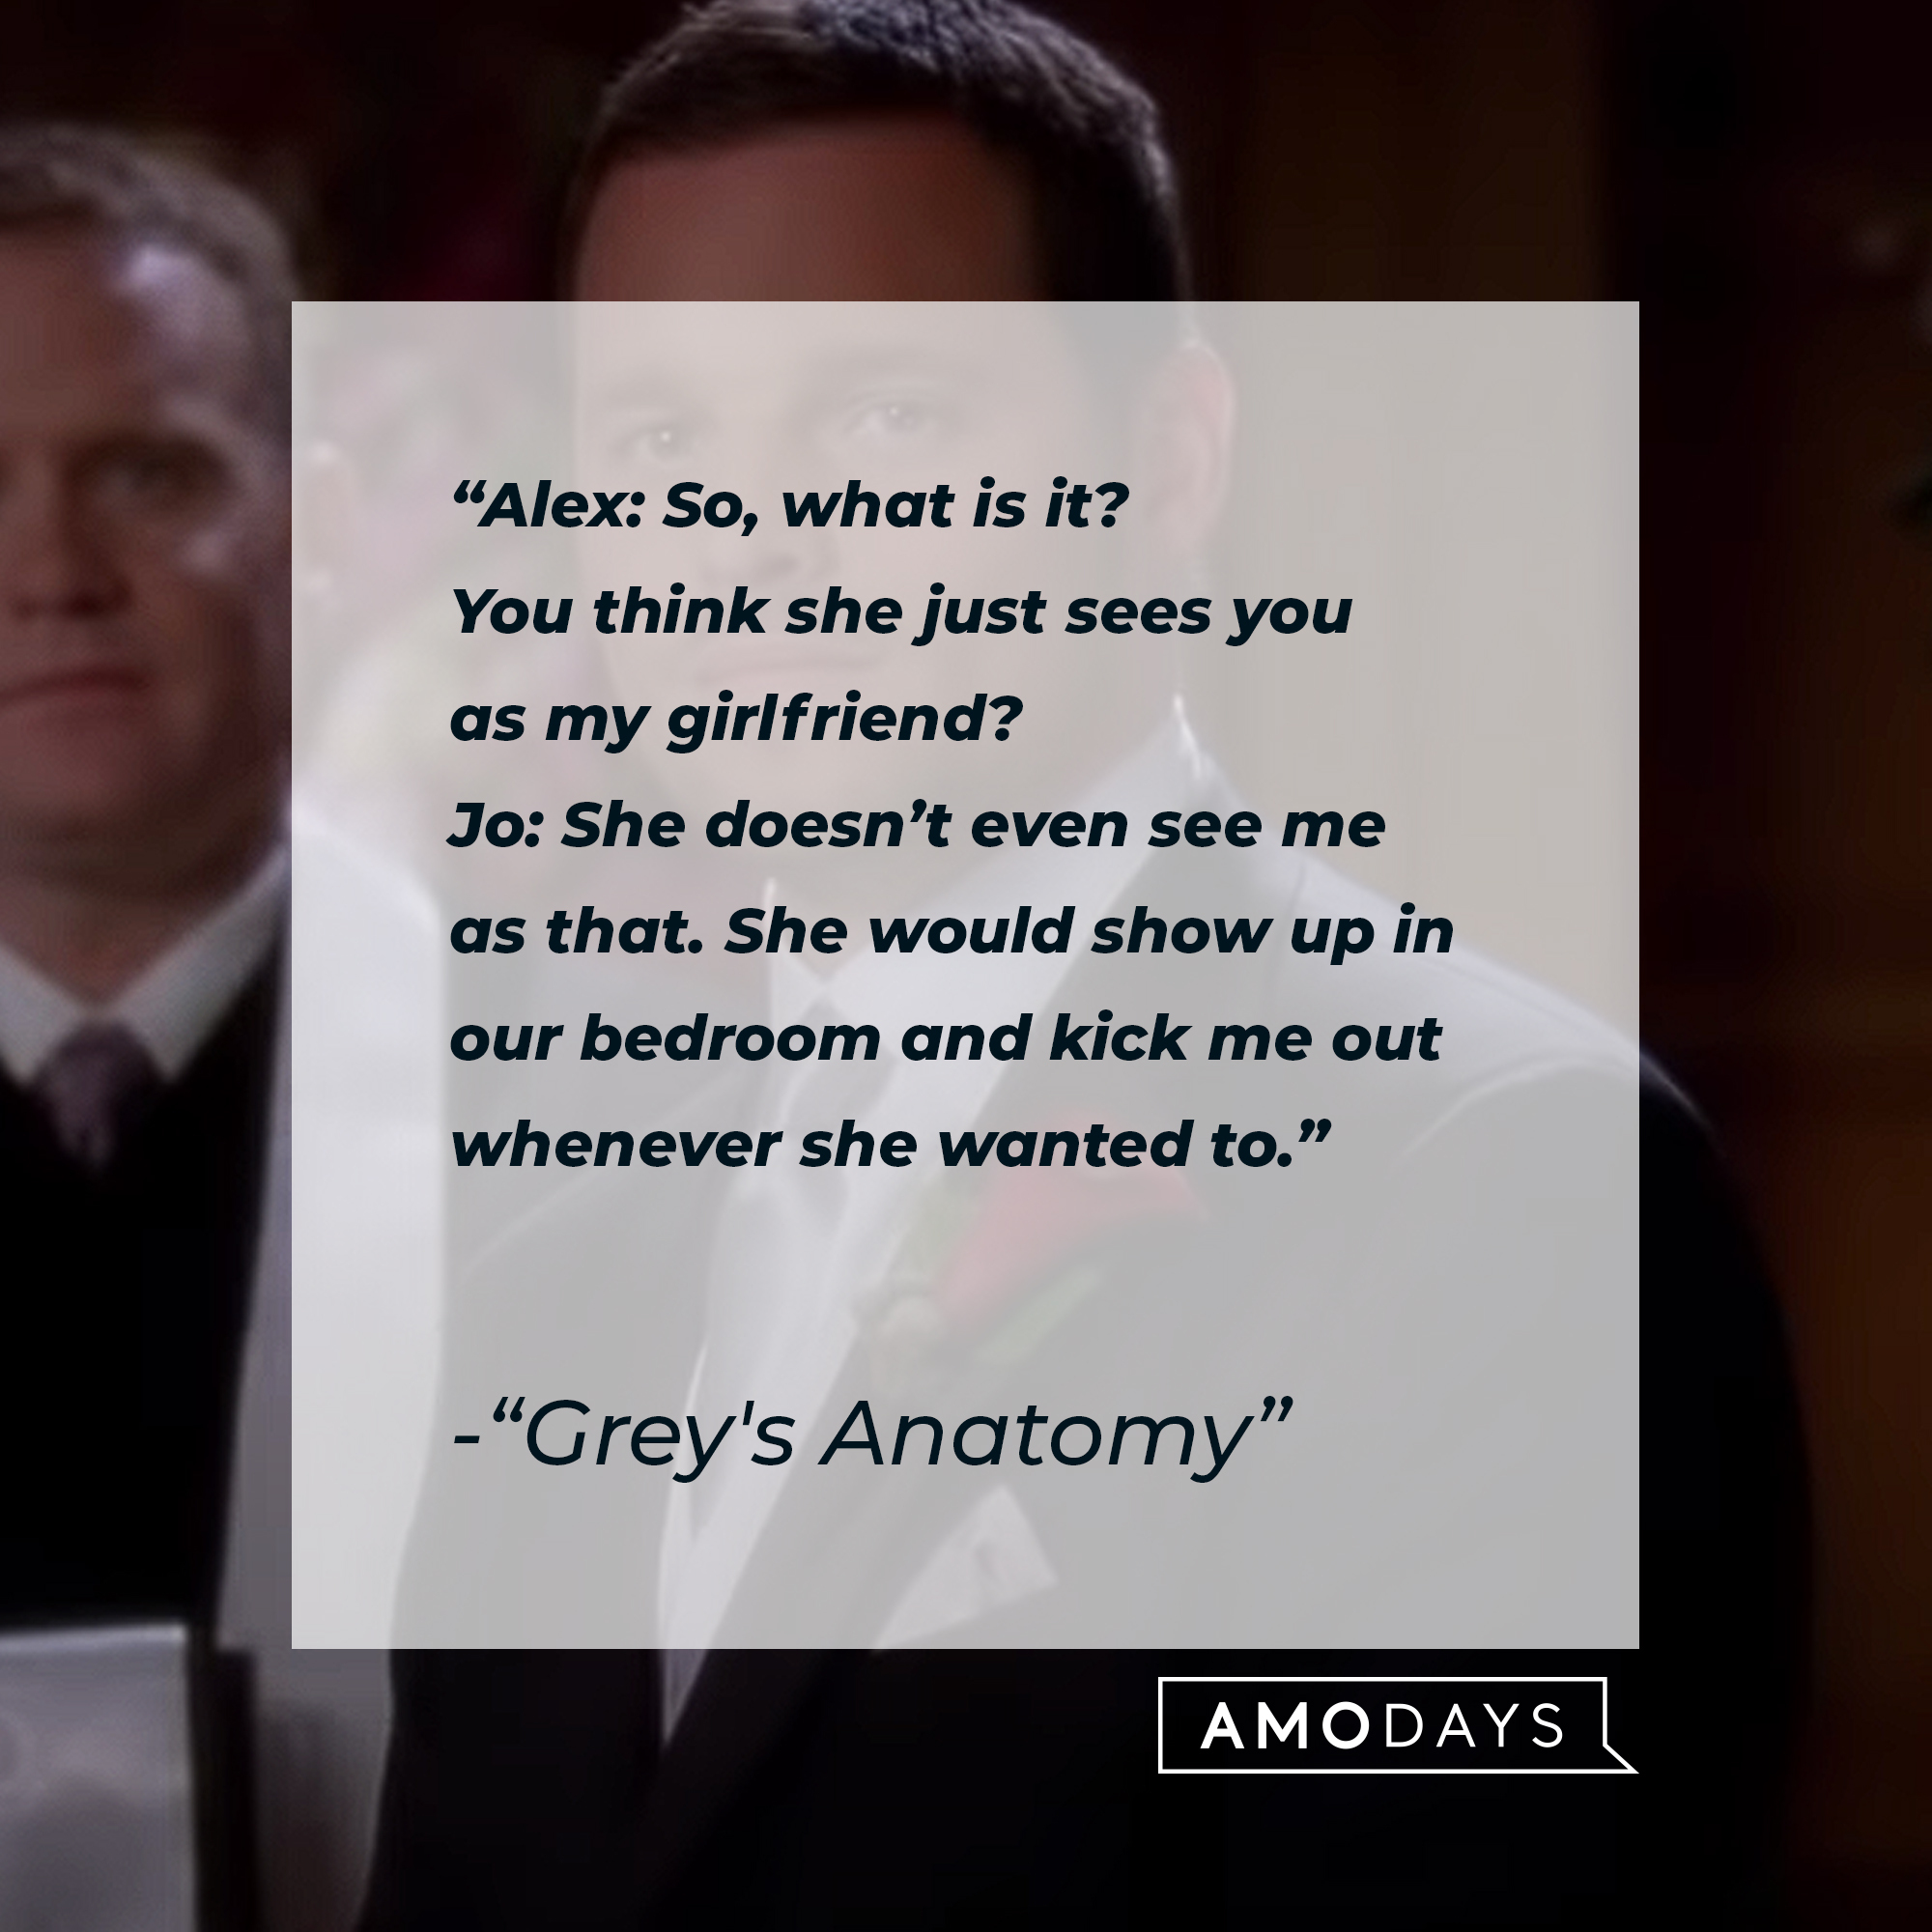 Quote from “Grey’s Anatomy”: “Alex: So, what is it? You think she just sees you as my girlfriend? Jo: She doesn’t even see me as that. She would show up in our bedroom and kick me out whenever she wanted to.” | Source: youtube.com/ABCNetwork